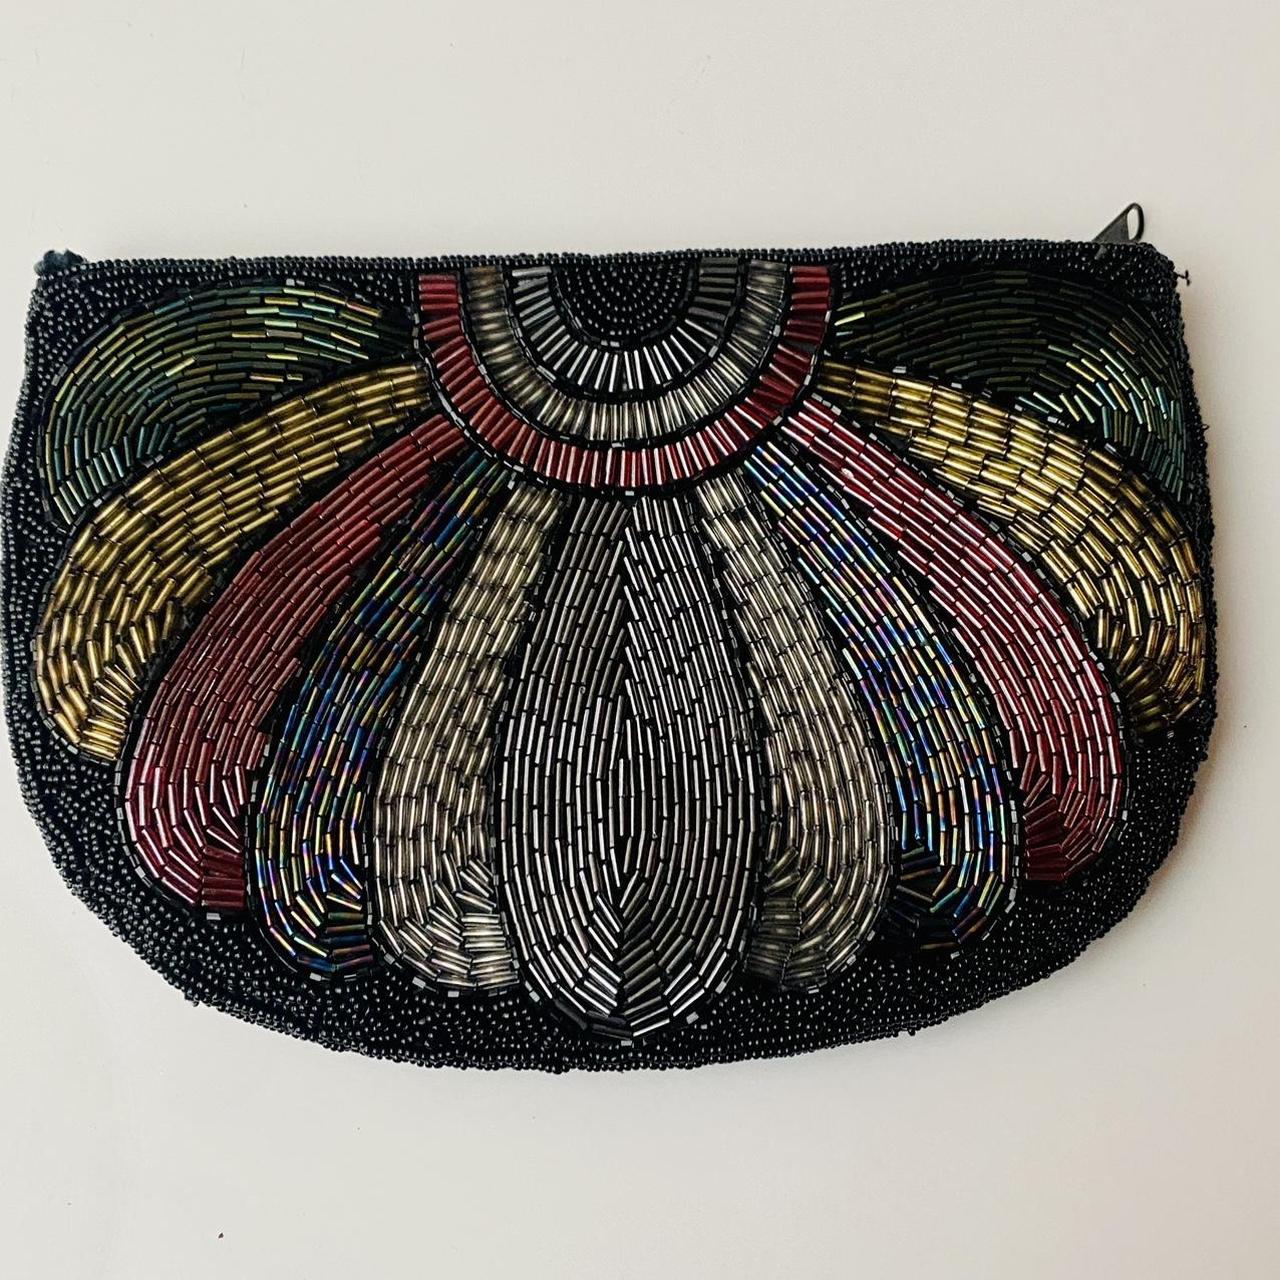 Beaded clutch. Small Beautiful bag in perfect - Depop